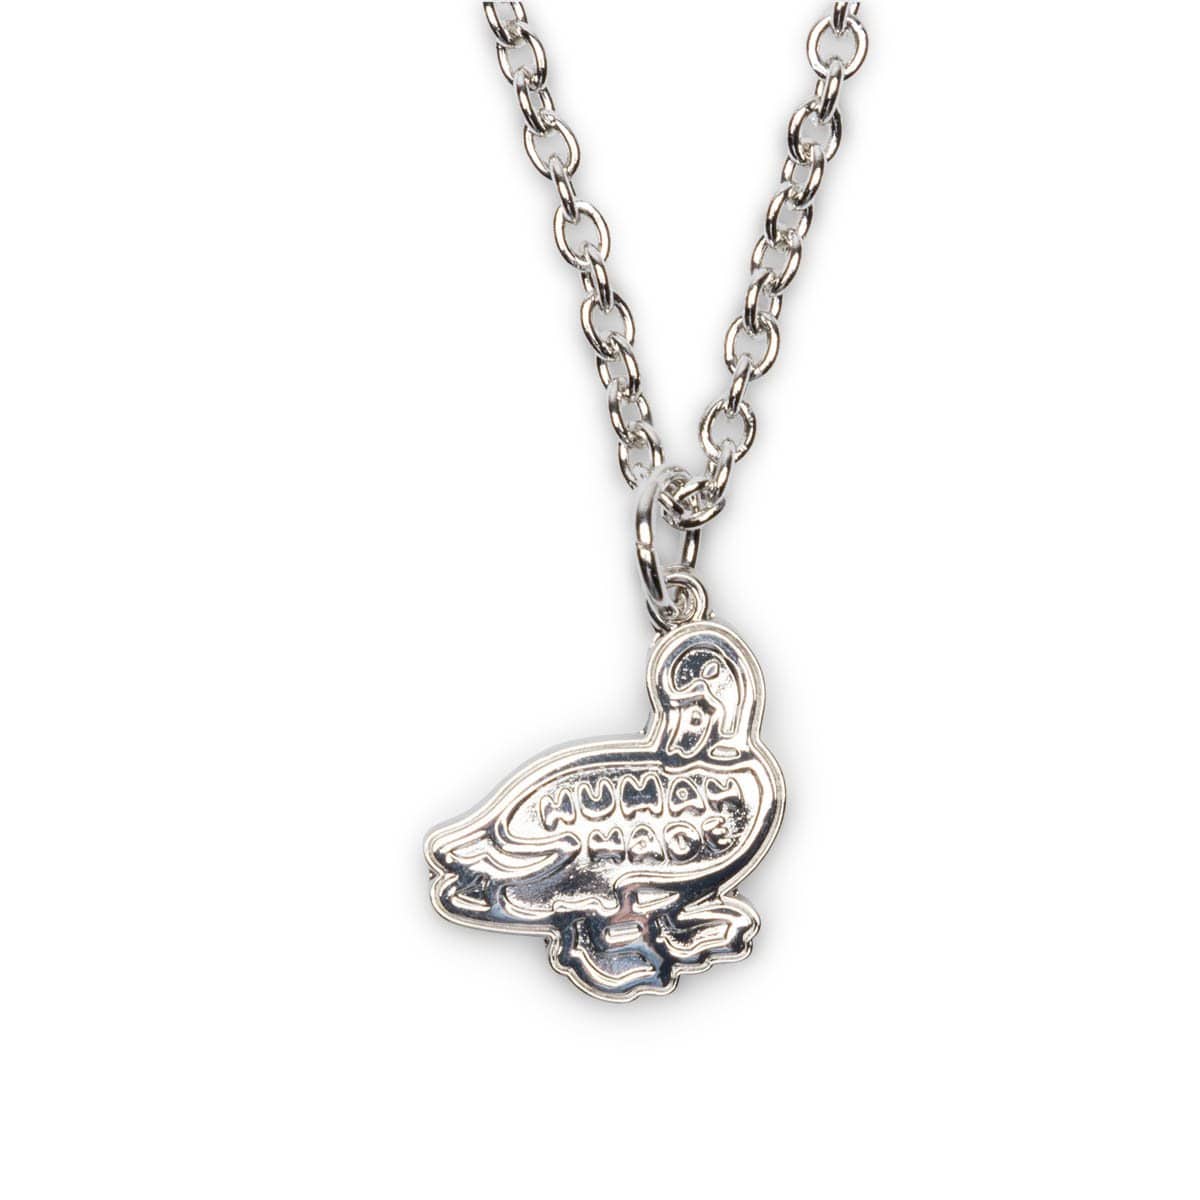 HUMAN MADE DUCK NECKLACE Silver-